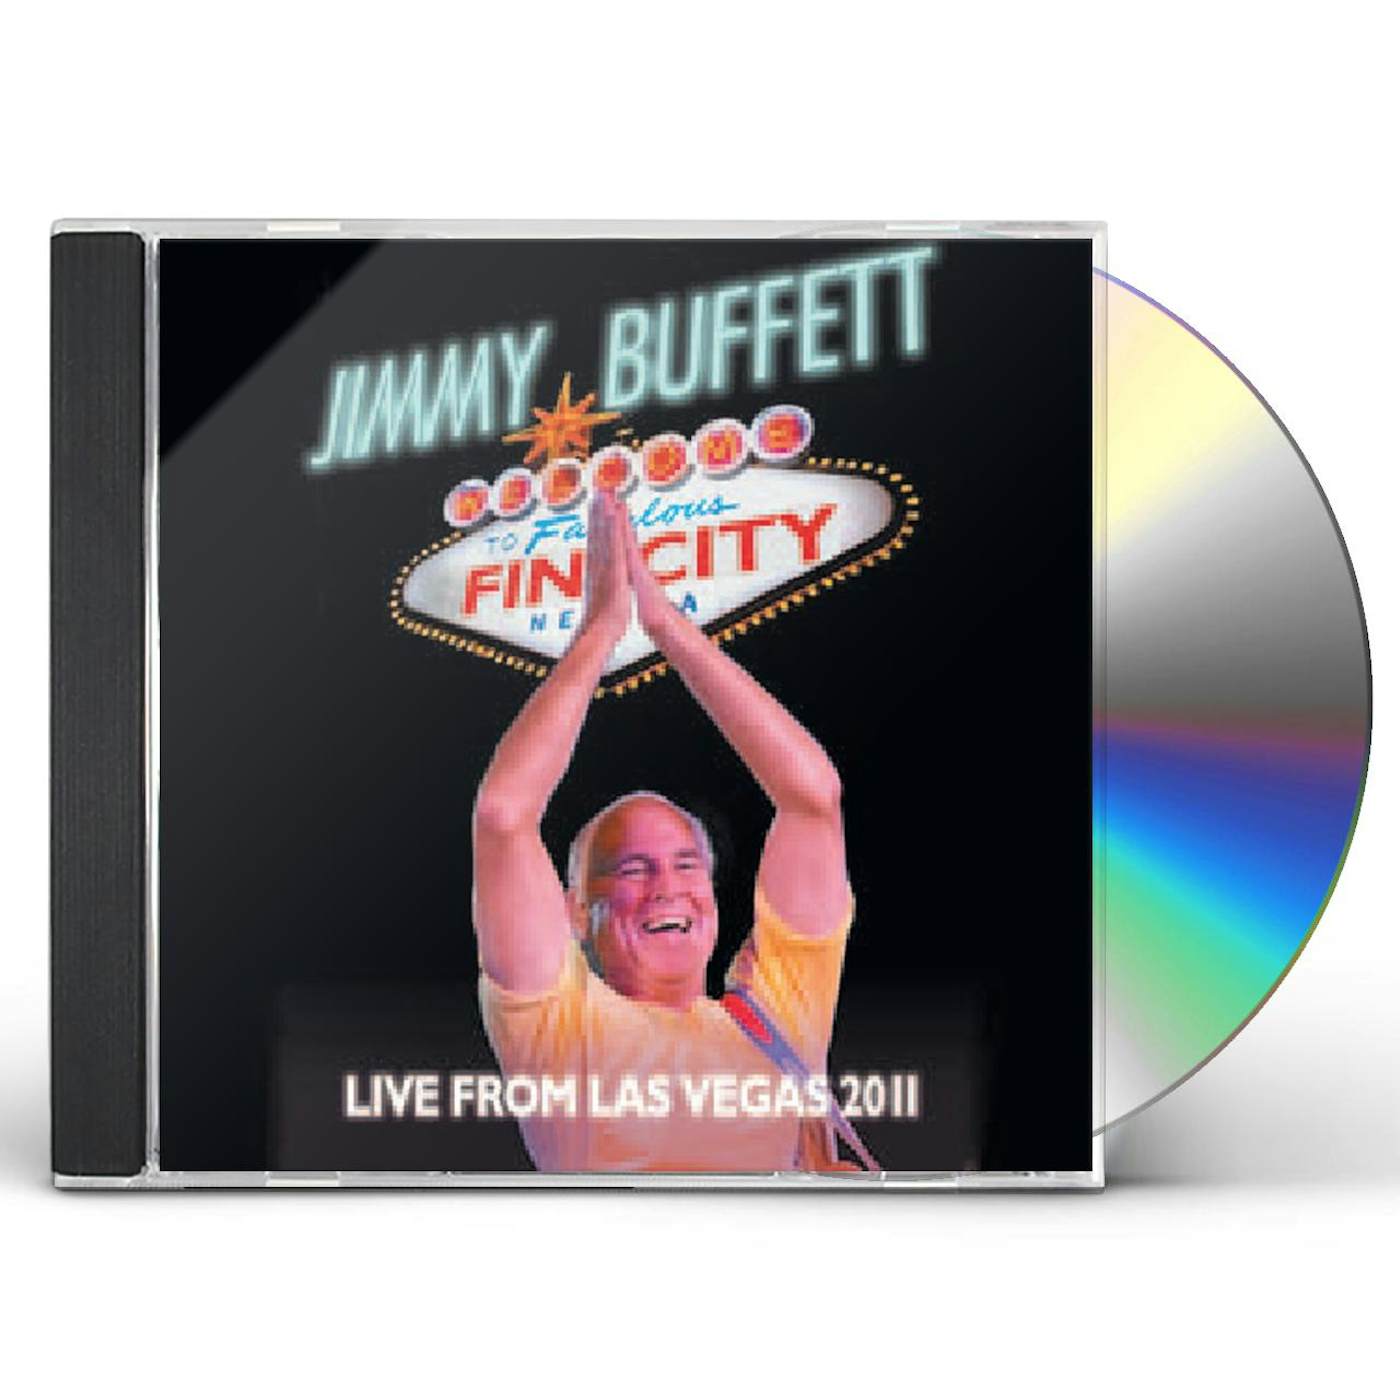 Jimmy Buffett WELCOME TO FIN CITY: LIVE FROM LAS VEGAS 2011 CD